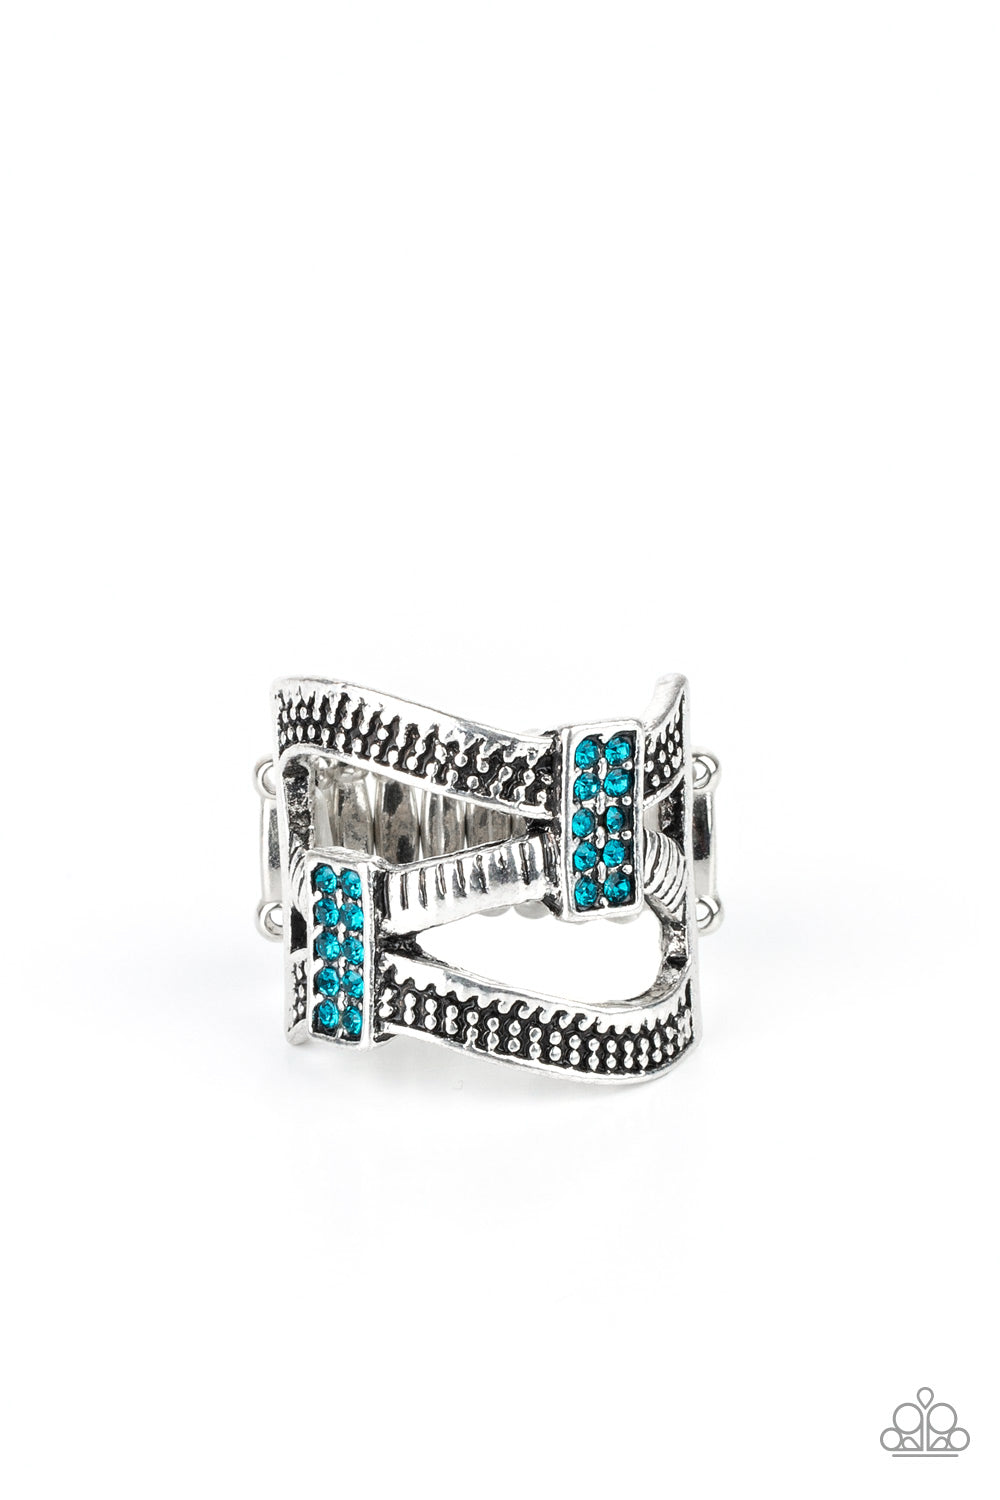 Urban Upscale - Blue and Silver Ring - Paparazzi Accessories - 
Etched and dotted in mismatched textures, three shimmery silver bars wave across the finger. Encrusted in dainty blue rhinestones, glittery frames connect the swooping bands for a refined look. Features a stretchy band for a flexible fit. Sold as one individual ring.
